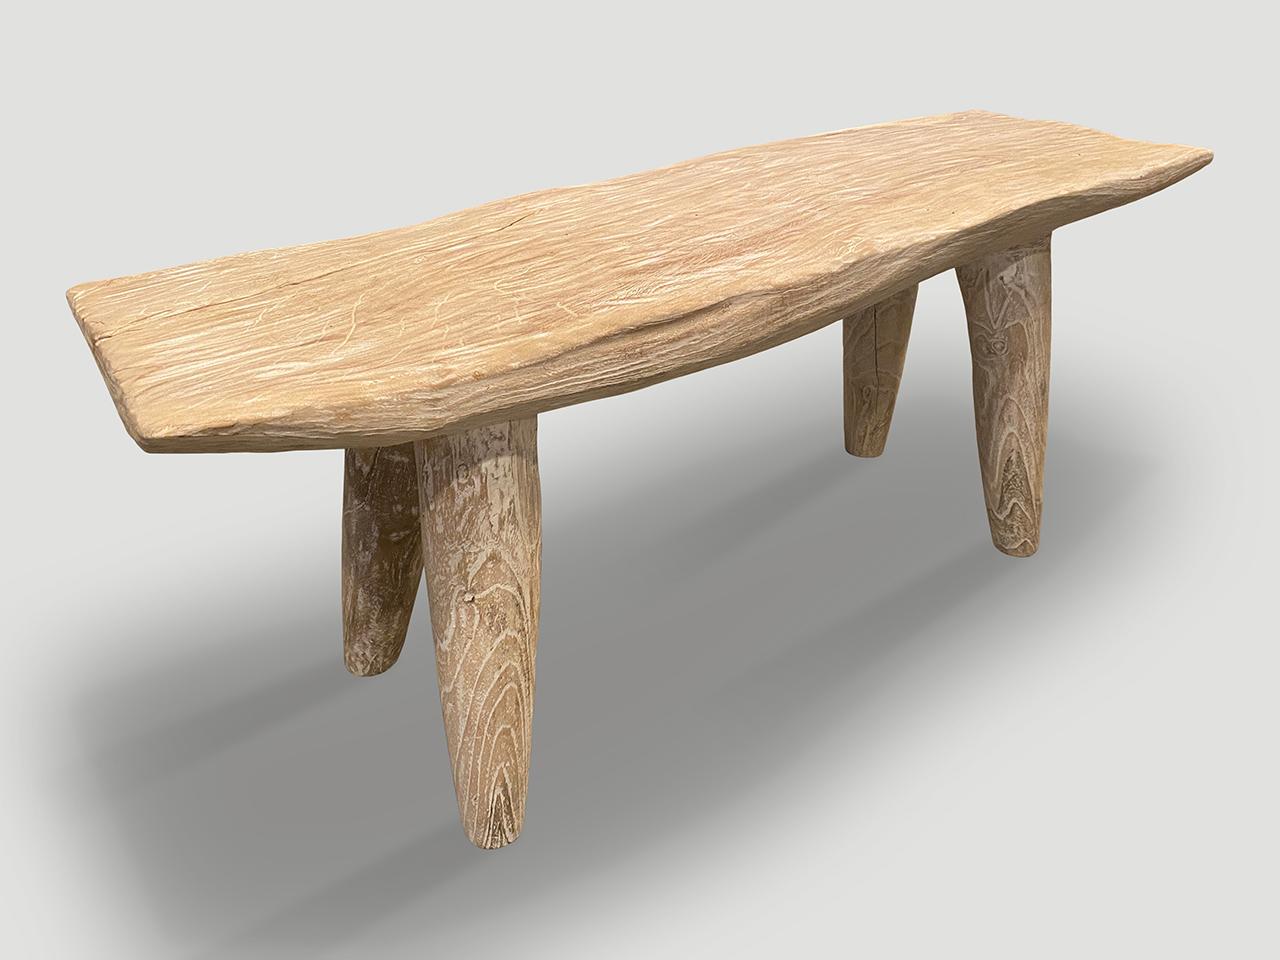 Andrianna Shamaris St. Barts Bleached Teak Wood Bench In Excellent Condition For Sale In New York, NY